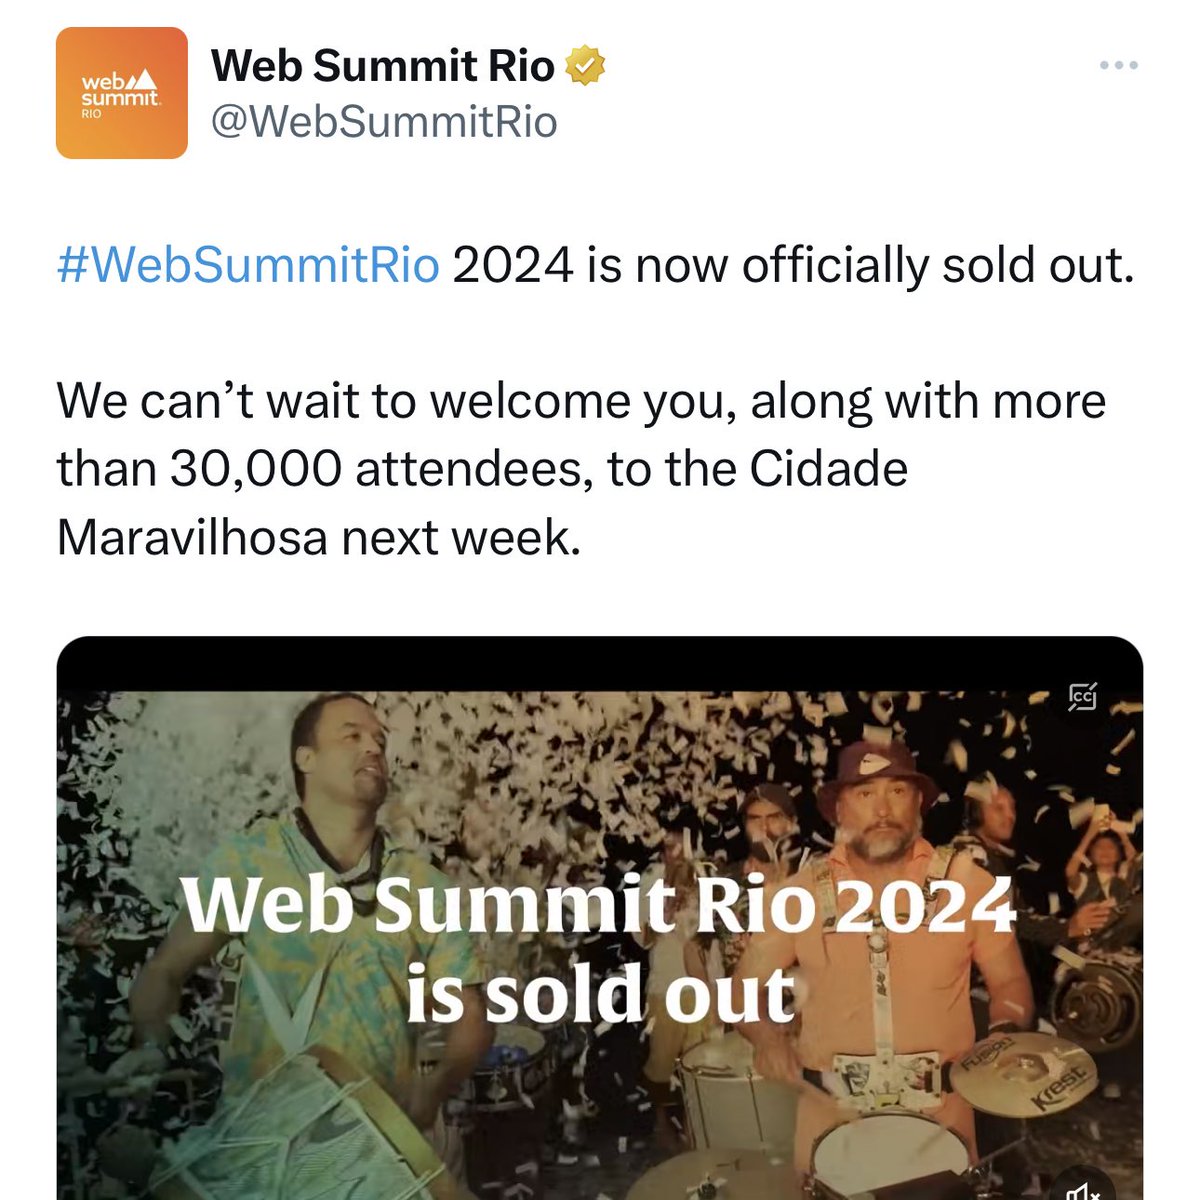 It took 6 long years from 2009, a dozen Web Summits, sometimes 3 a year, 100’s of meet-ups, thousands of calls & an infinity of emails to get Web Summit in Dublin to the scale it’s taken us just ONE year to achieve in Rio. LatAm tech is booming. Massively proud of @TeamWebSummit